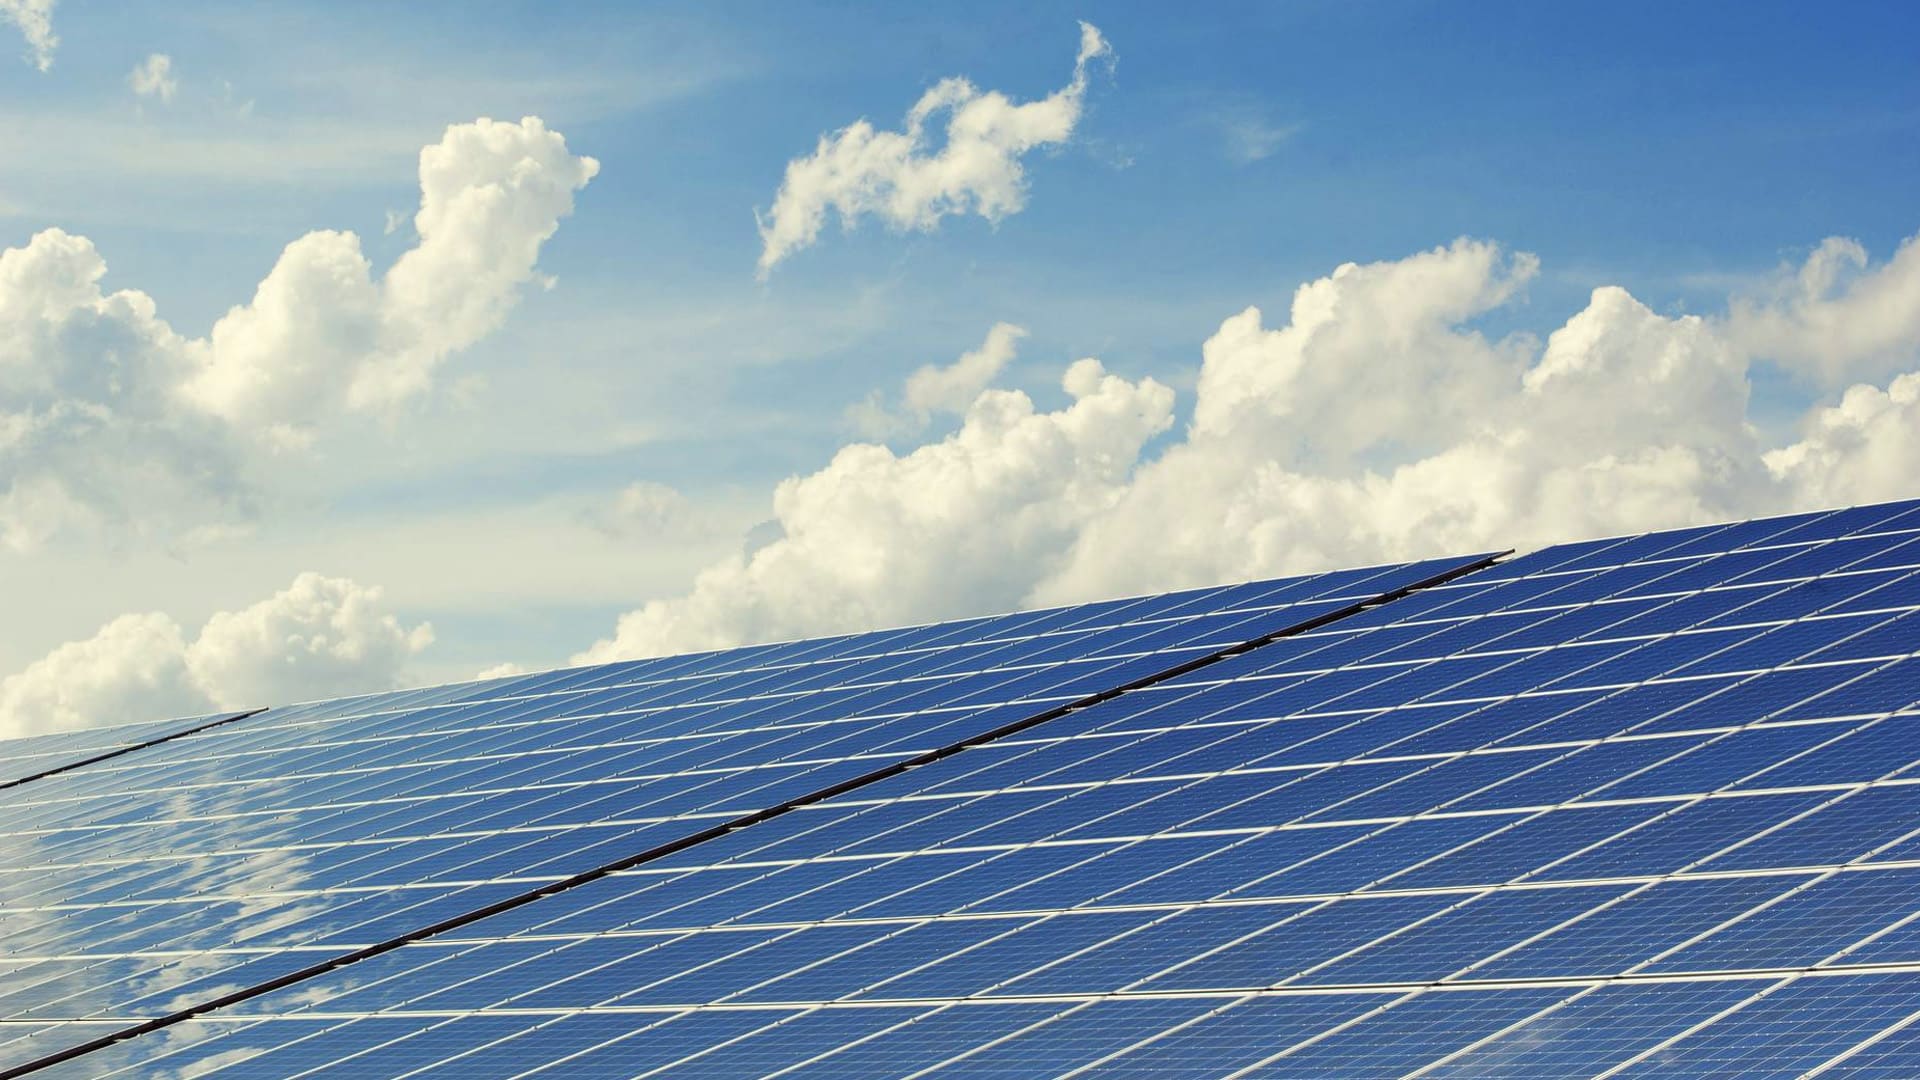 Gensol Engineering bags orders worth Rs 153 cr to build 58.8 MW solar projects